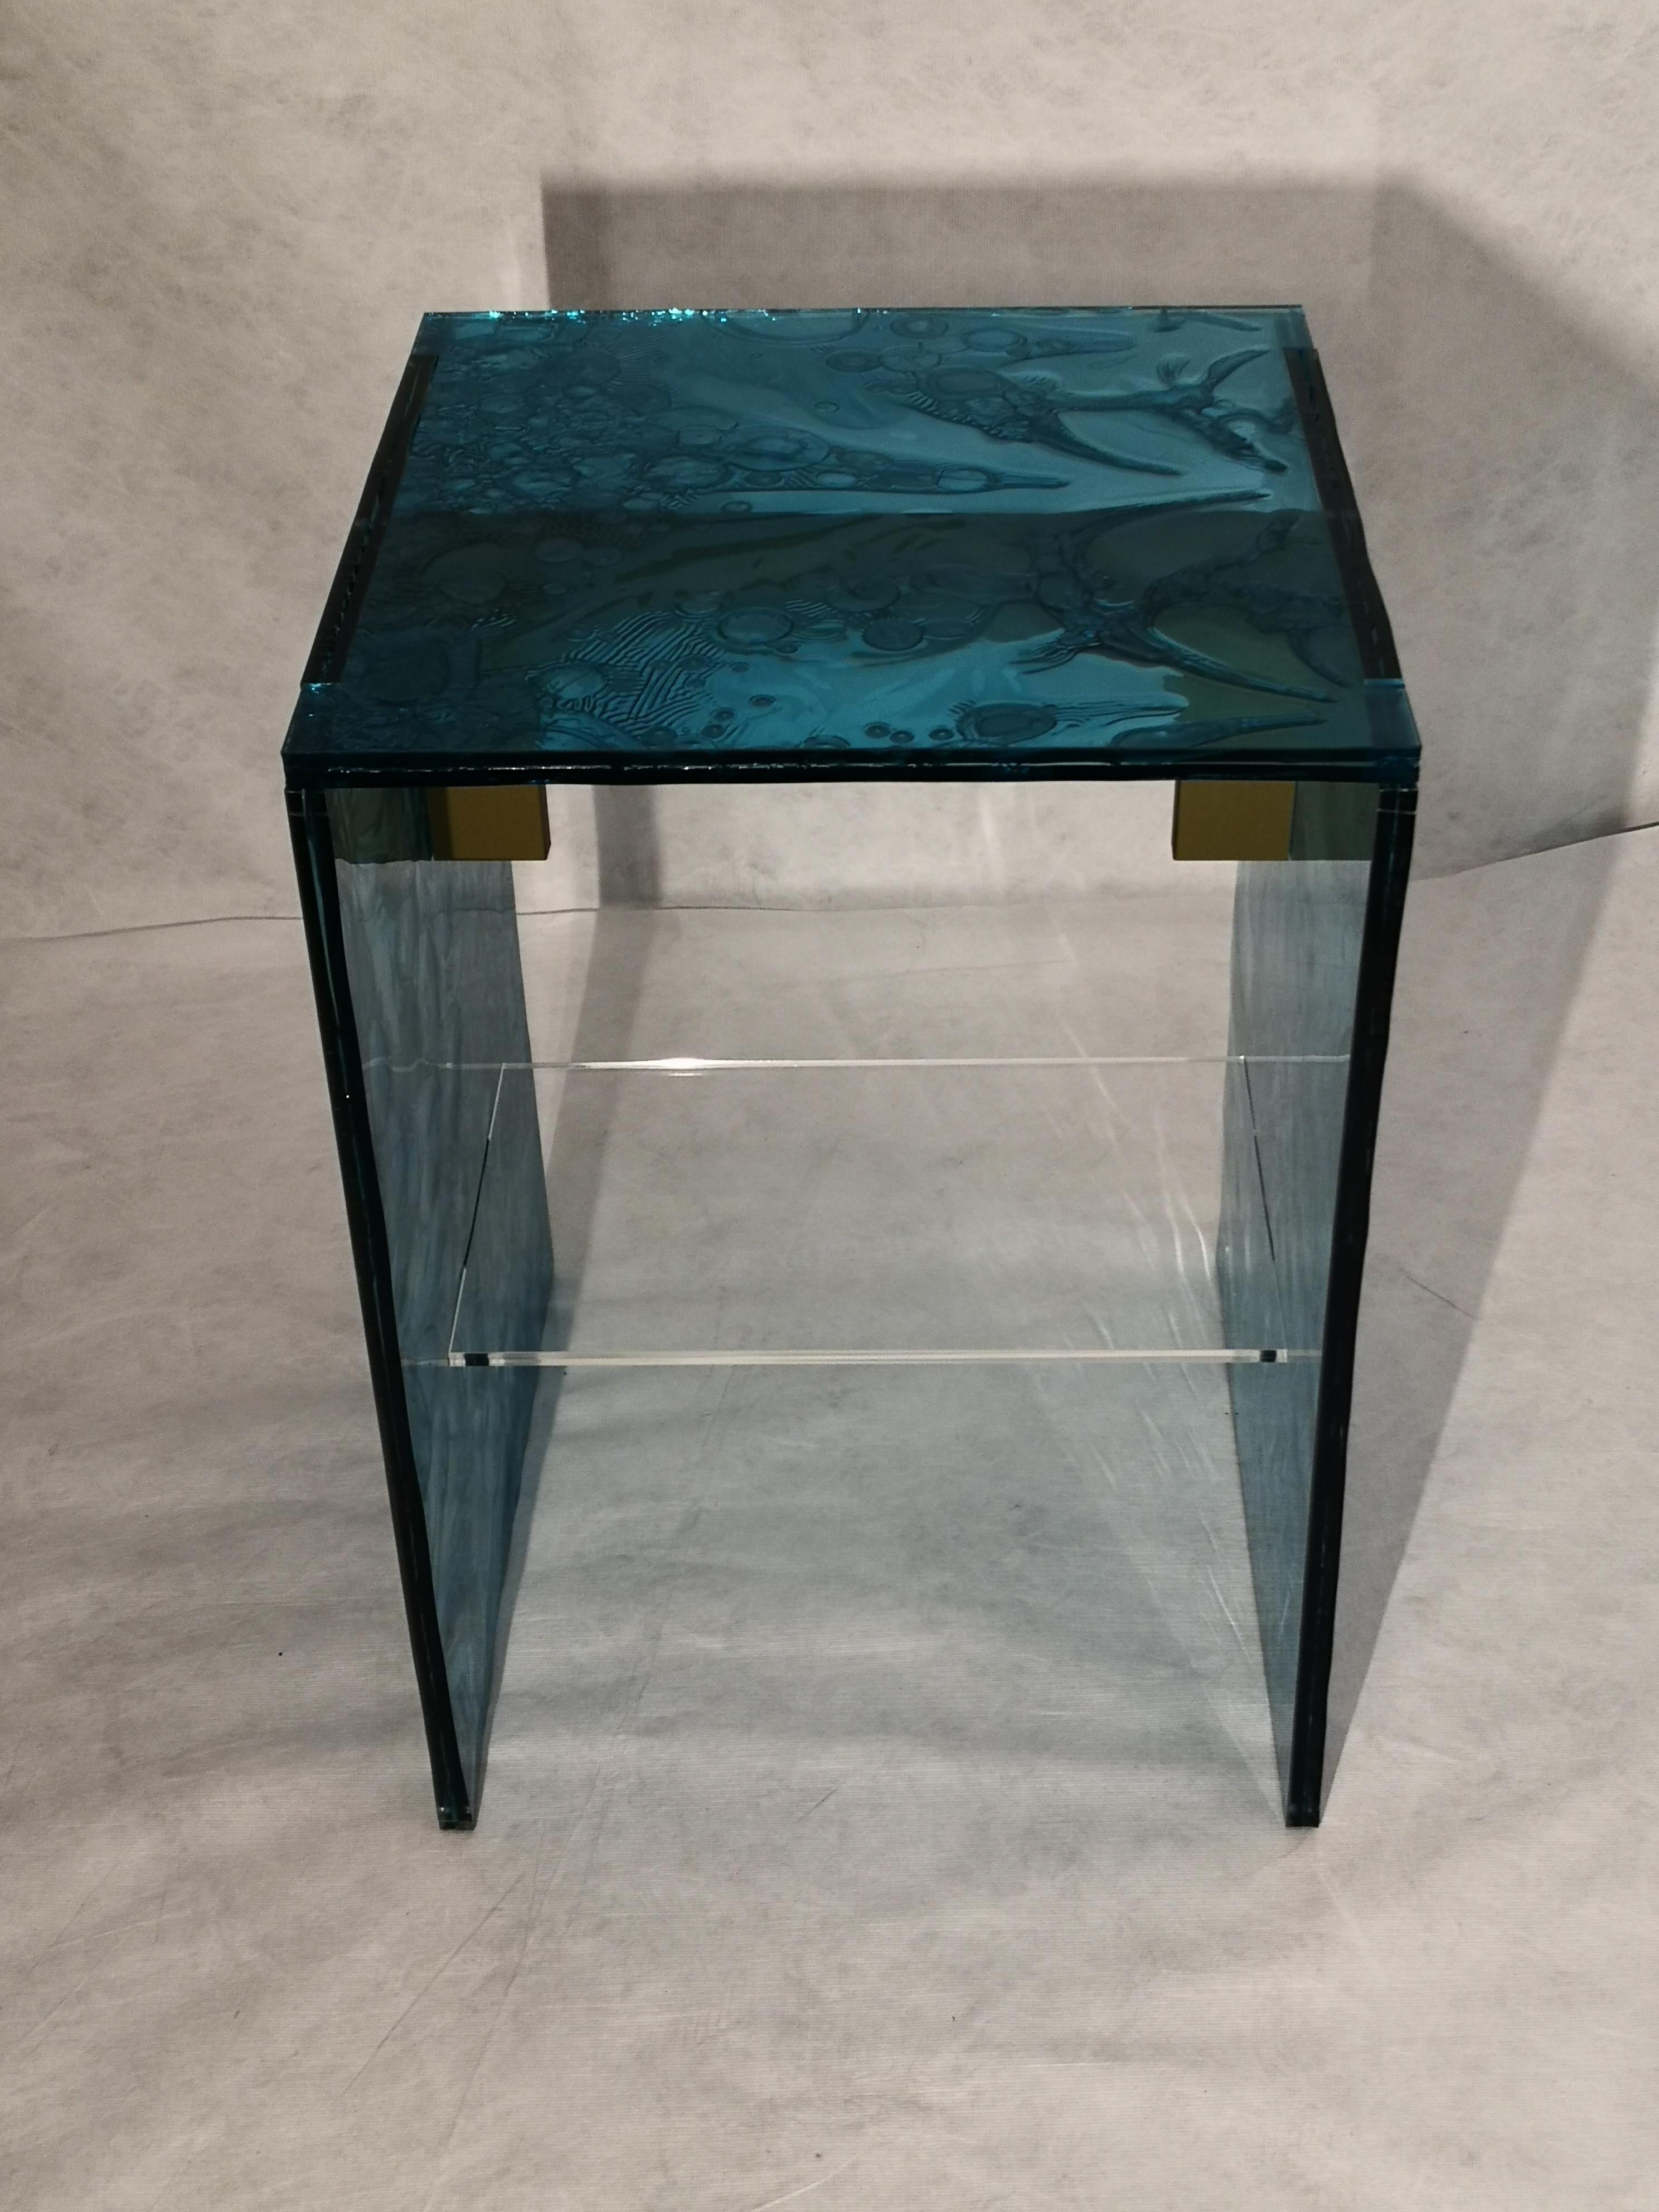 Modern Sketch Quadro Side Table 2 Made of Green Acrylic Des. Roberto Giacomucci in 2020 For Sale